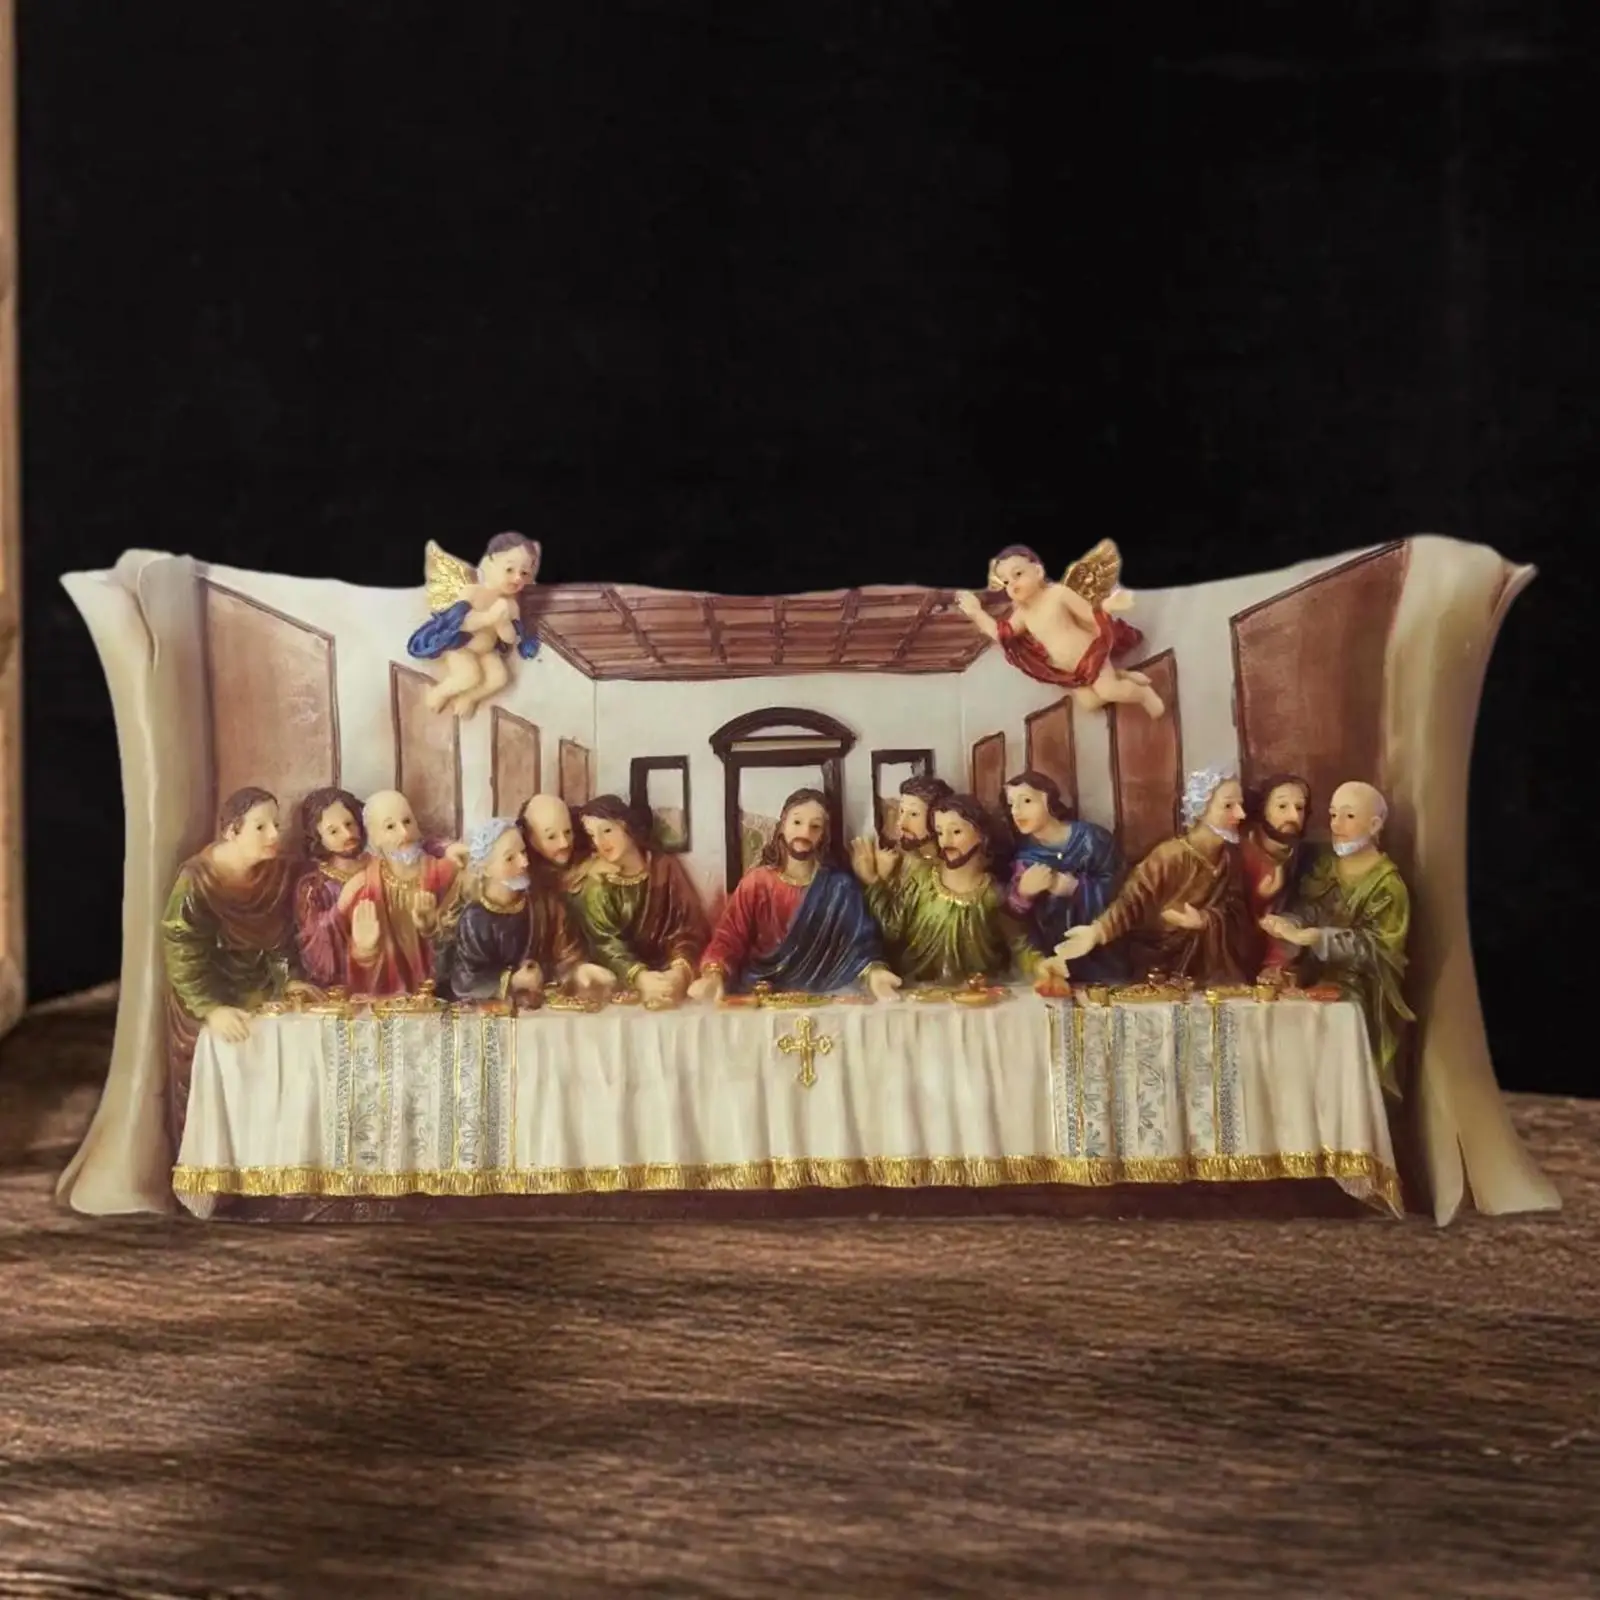 Resin Last Supper Sculpture Statue Jesus and 12 Disciples for Office Decor